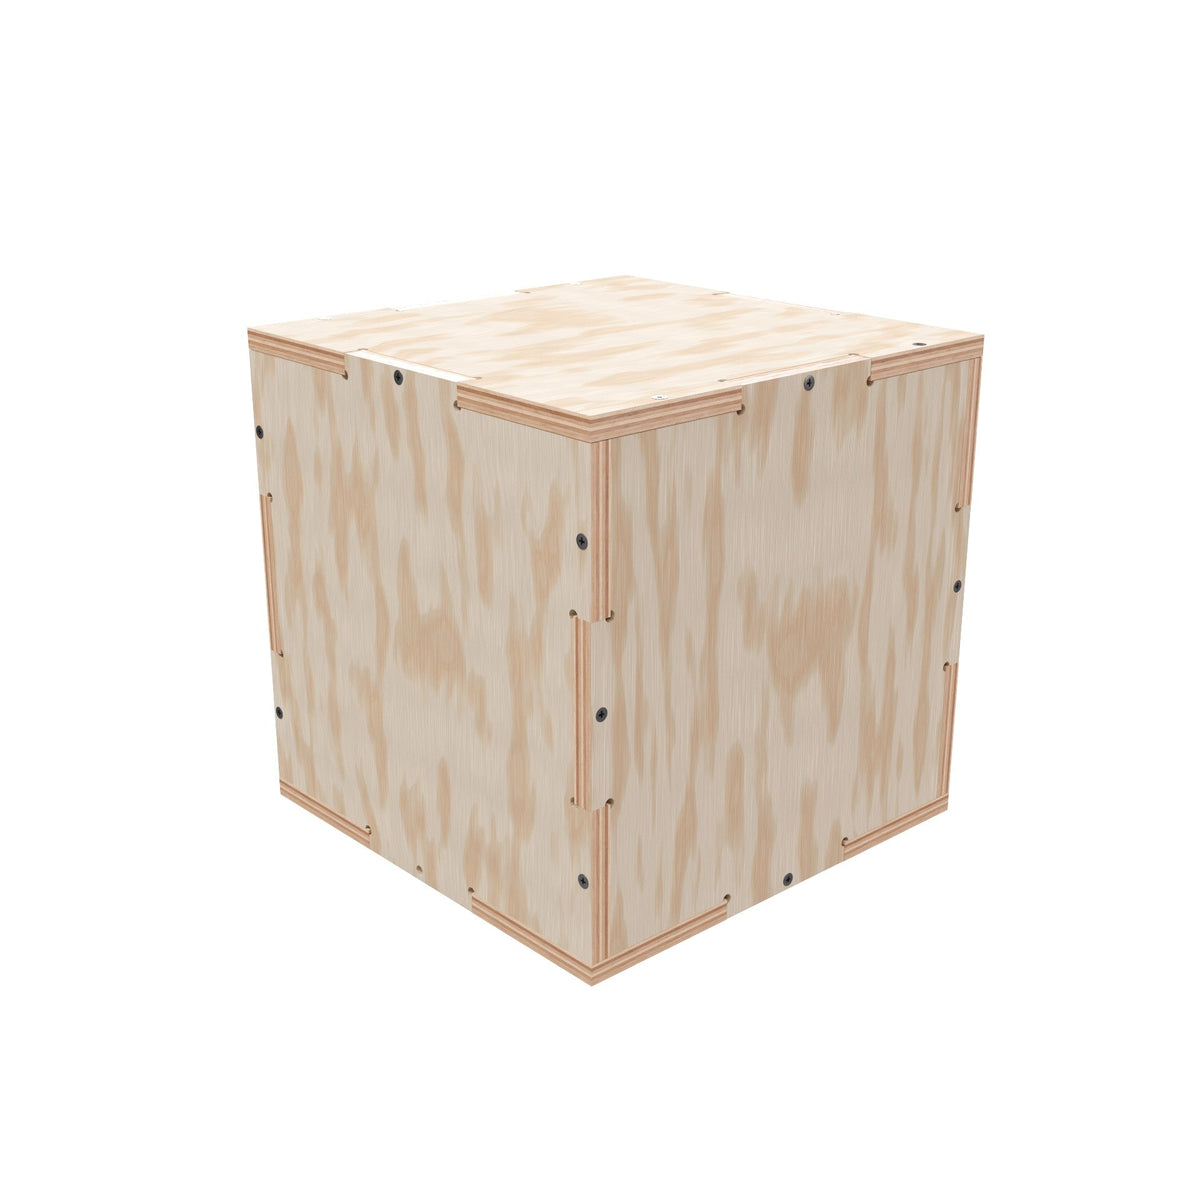 Plywood Shipping Crate 12x12x12